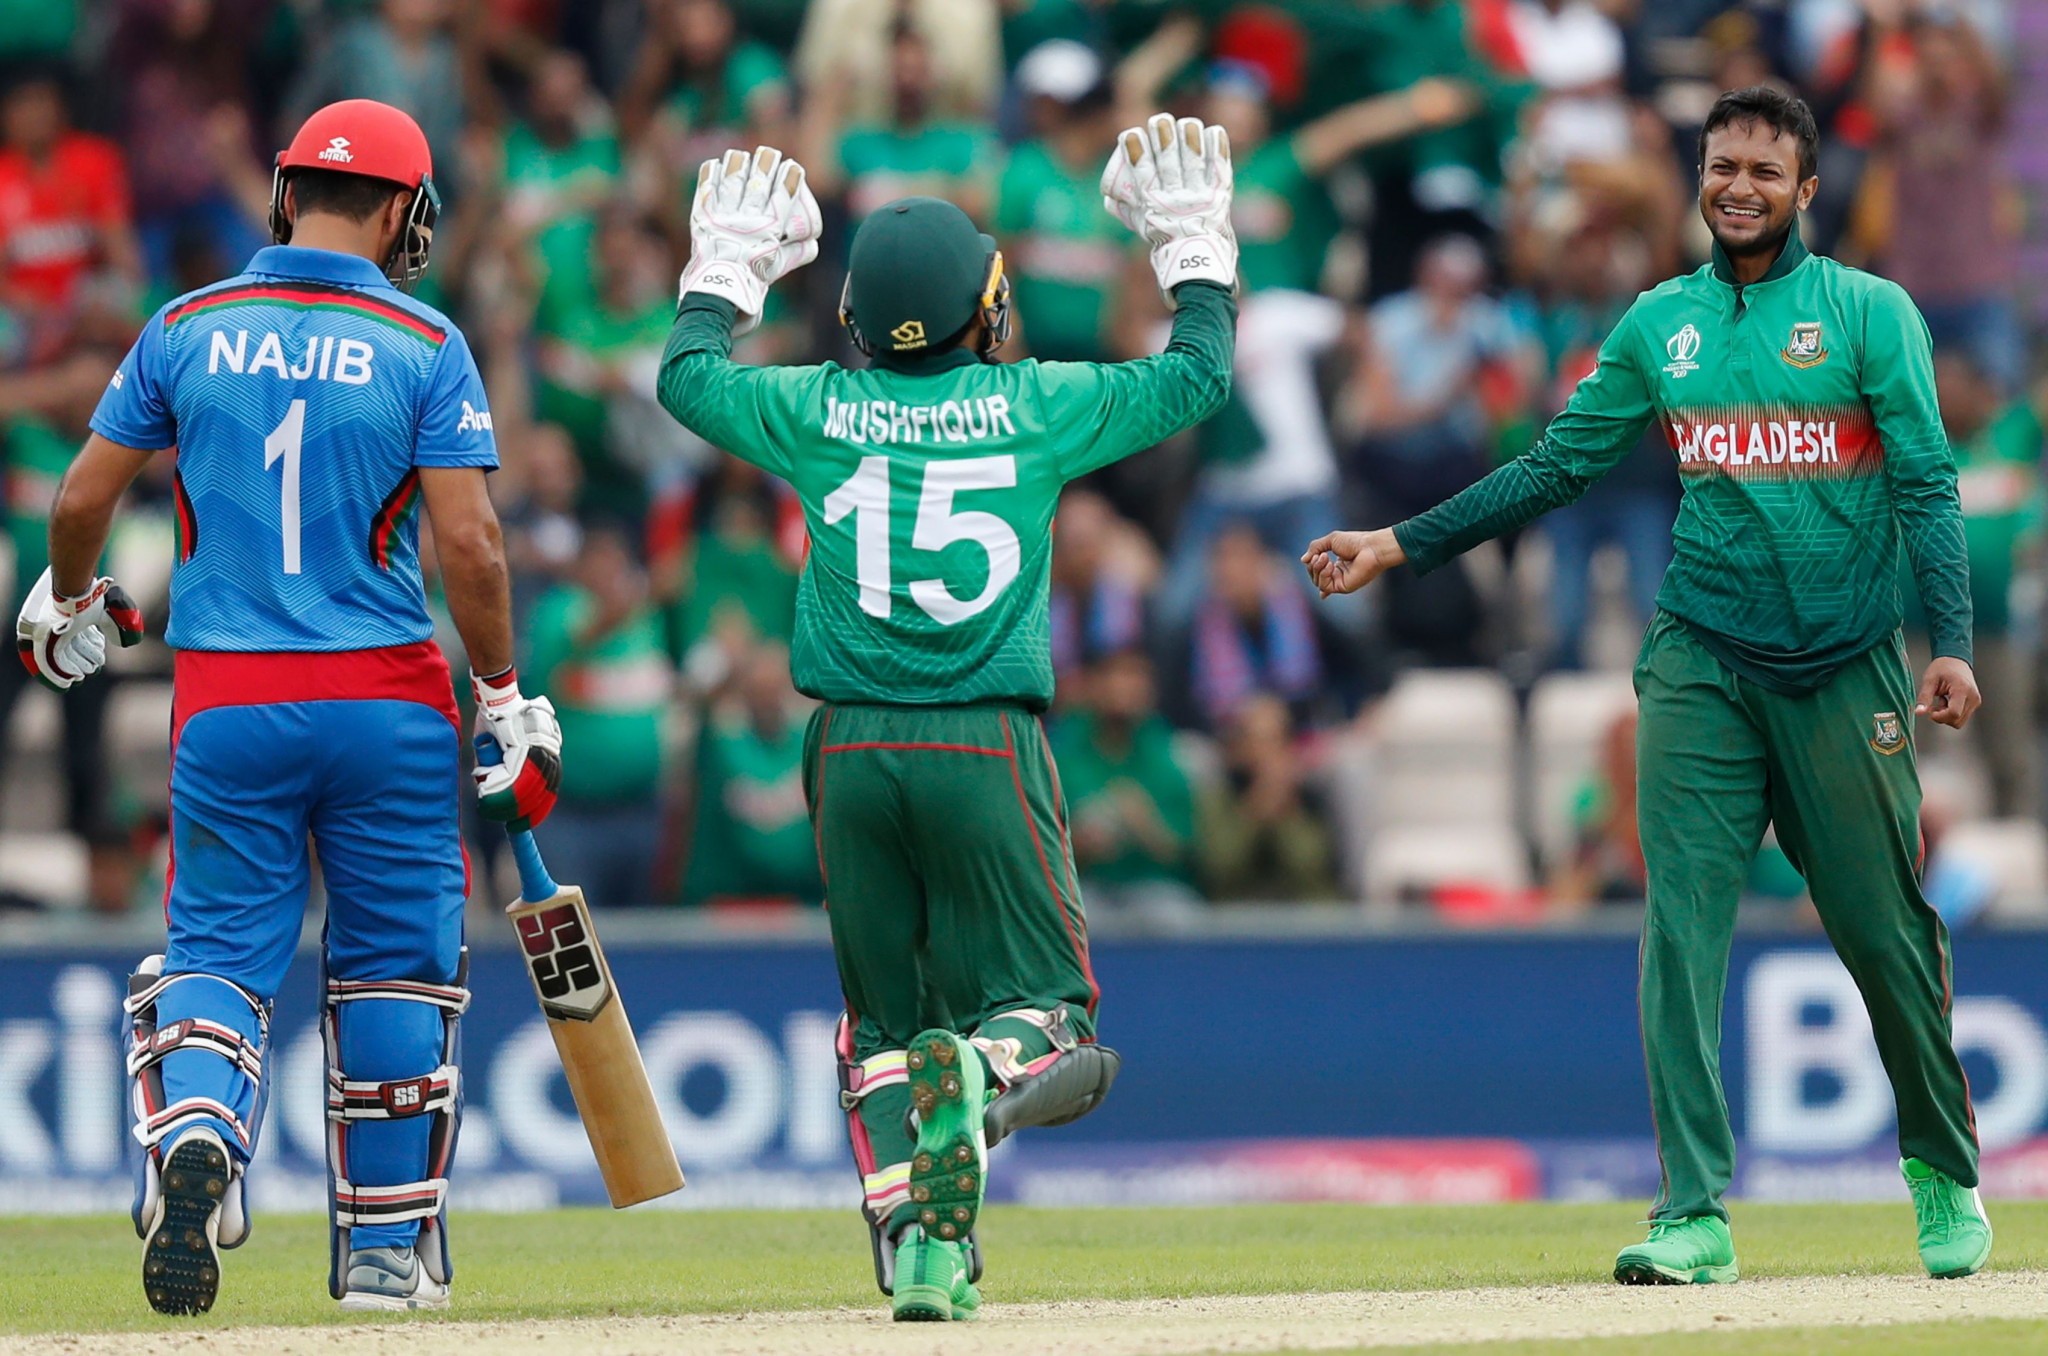 Bangladesh rose to fifth in the Cricket World Cup standings and remain in contention for a semi-final berth with a 62-run win against Afghanistan today ©Getty Images